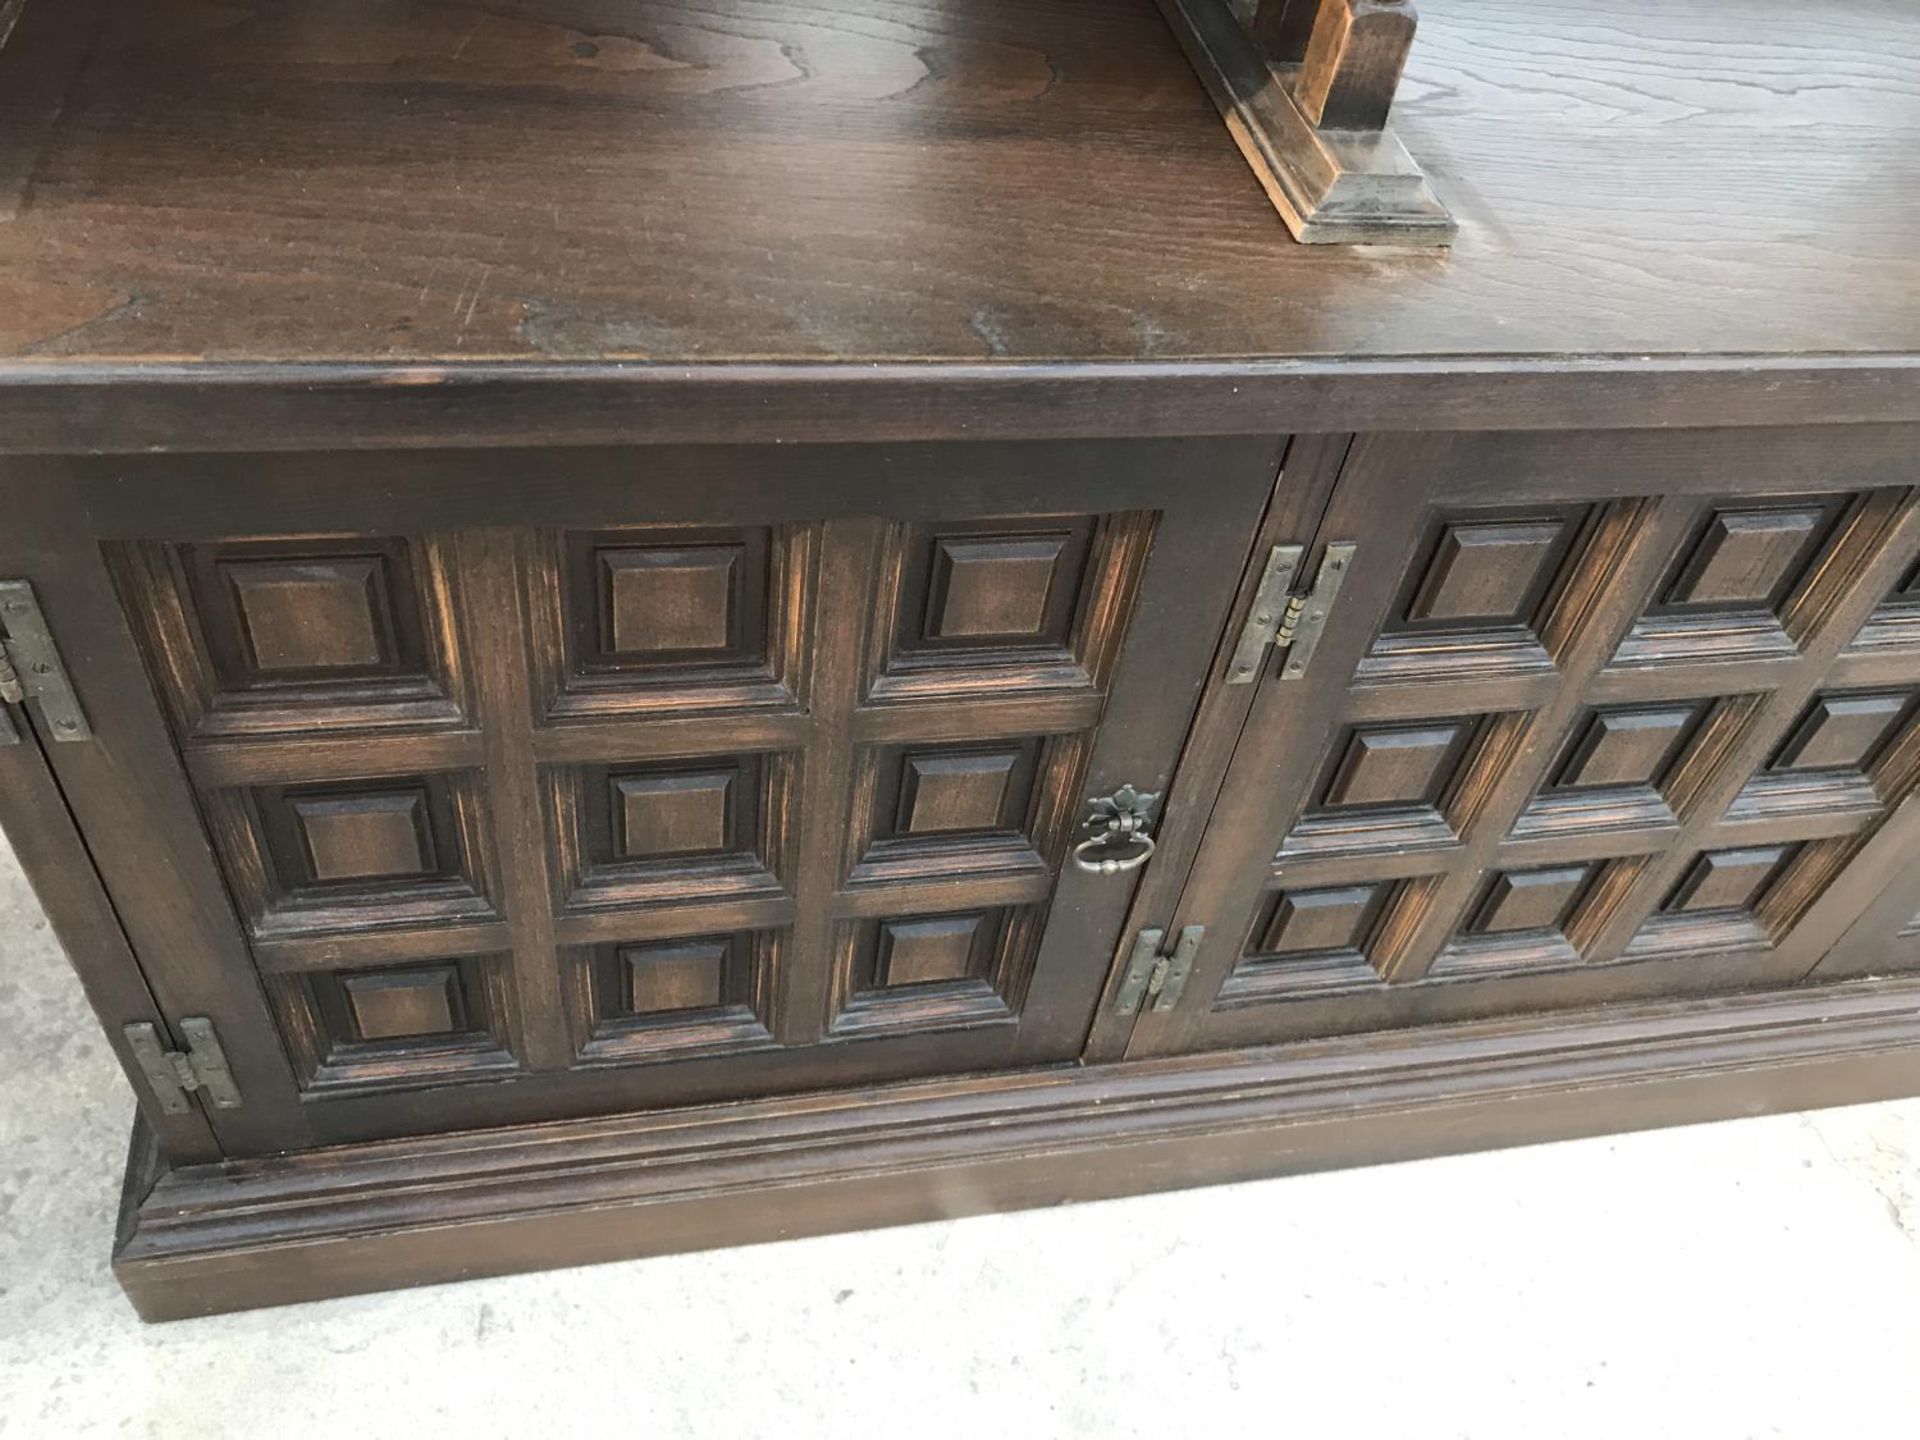 A YOUNGER TOLEDO CABINET WITH FOUR LOWER DOORS, TWO UPPER DRAWERS AND TWO GLAZED DOORS - Image 2 of 3